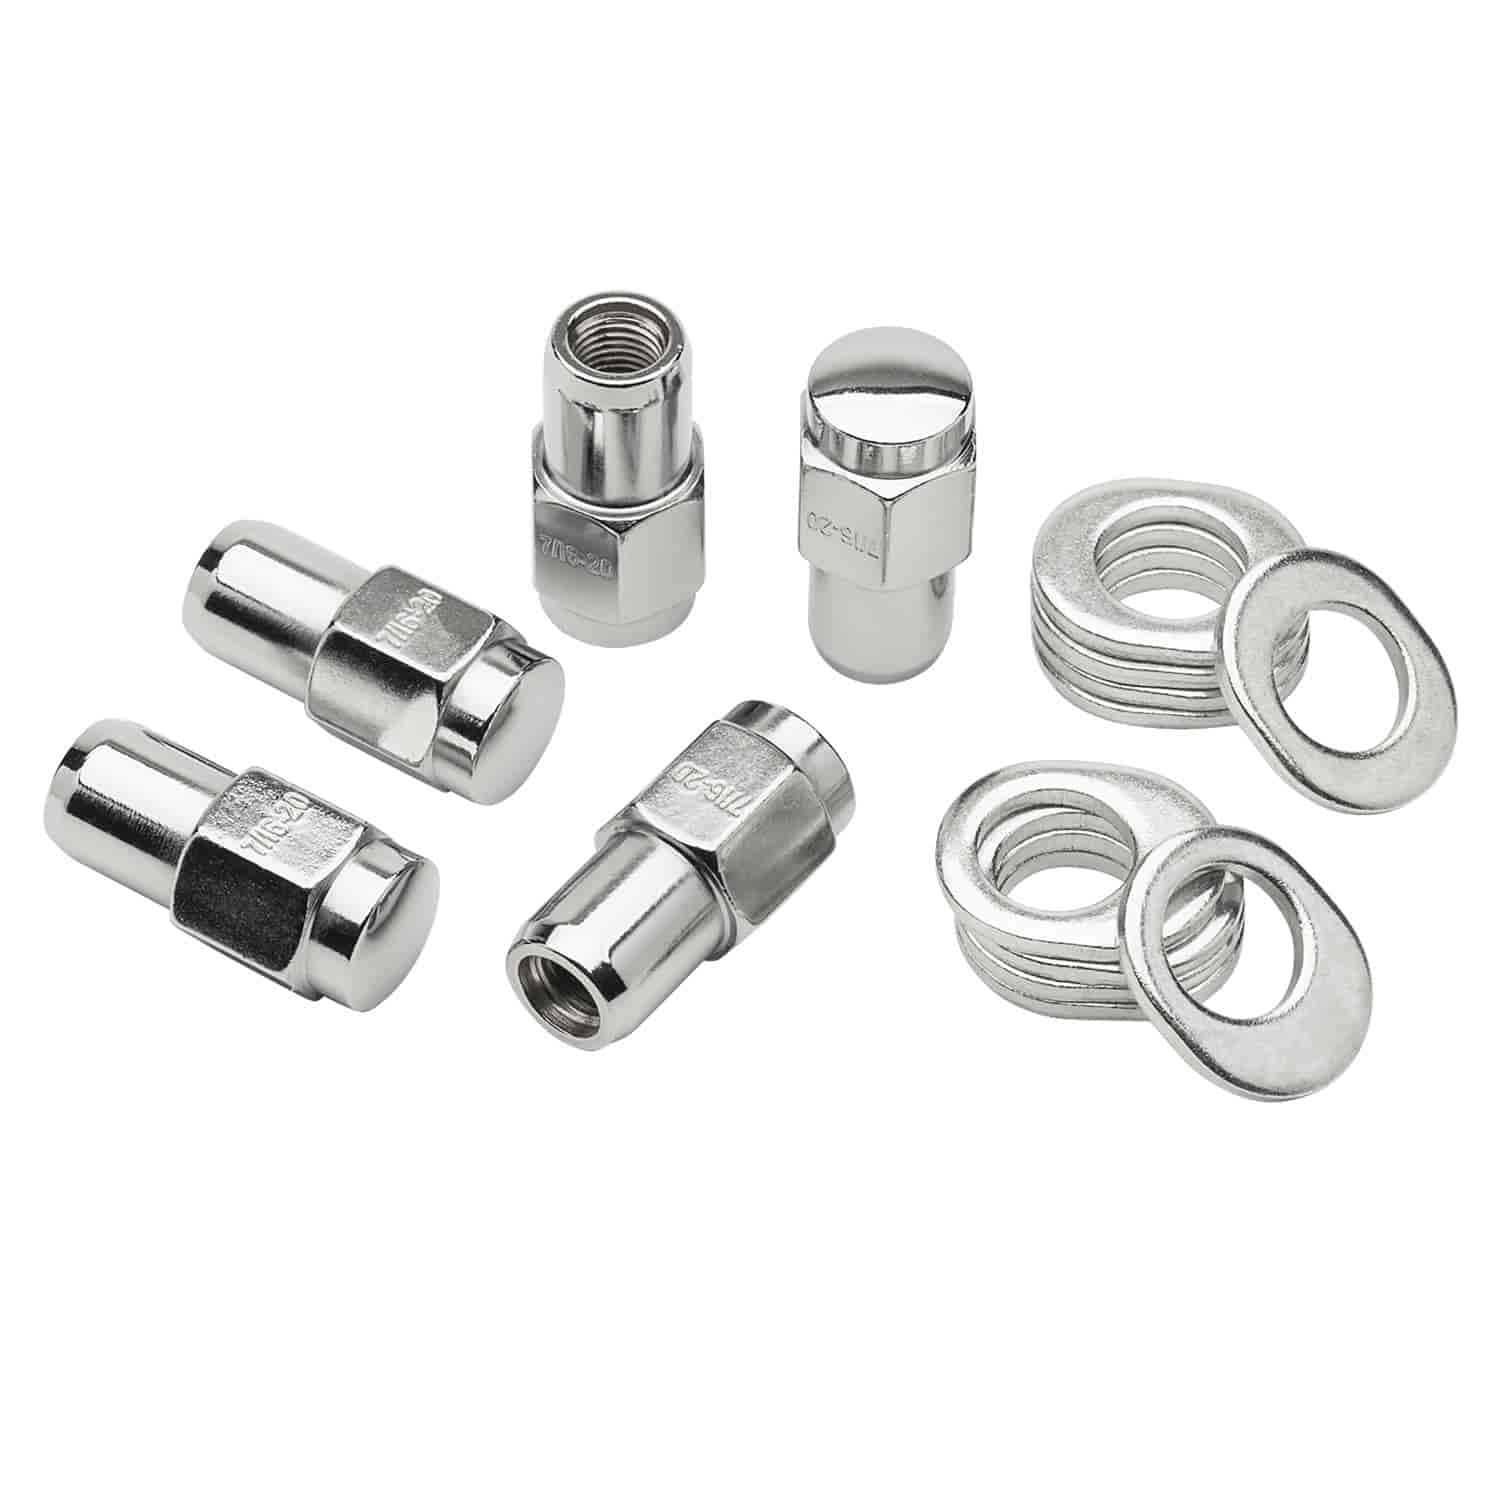 Lug Nuts with Center & Offset Washers 7/16" RH Thread